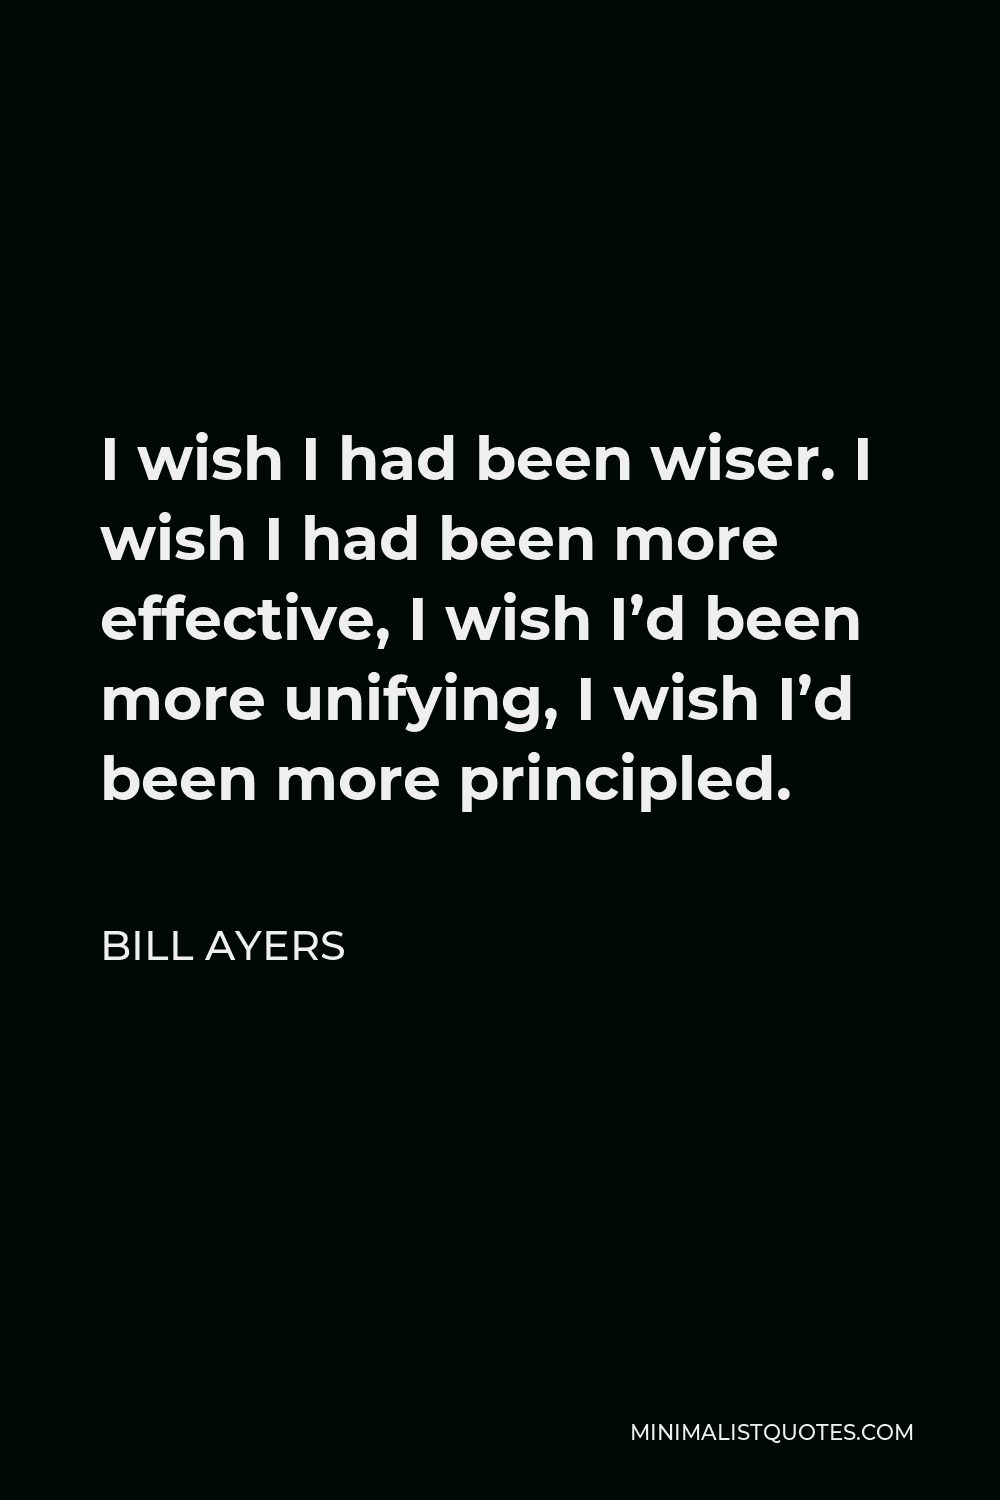 Bill Ayers Quote - I wish I had been wiser. I wish I had been more effective, I wish I’d been more unifying, I wish I’d been more principled.